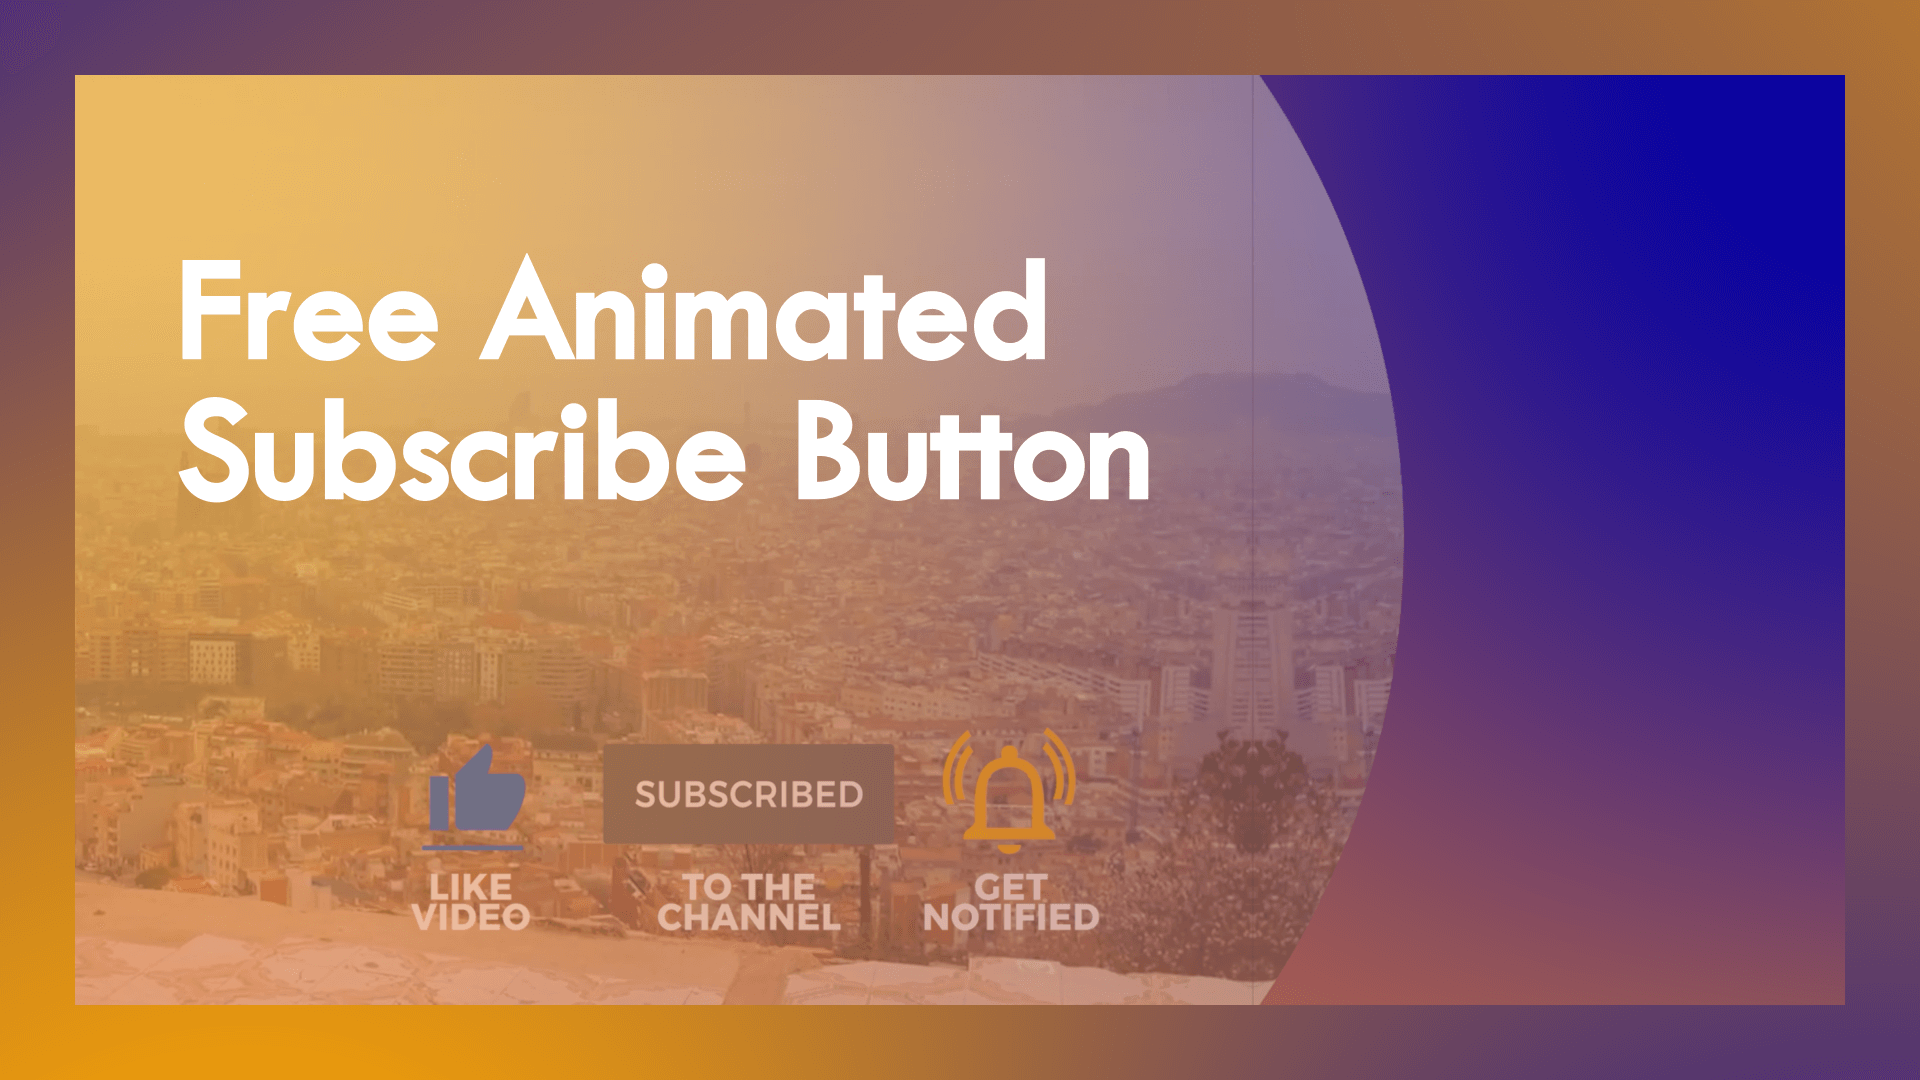 Free Animated Subscribe Button